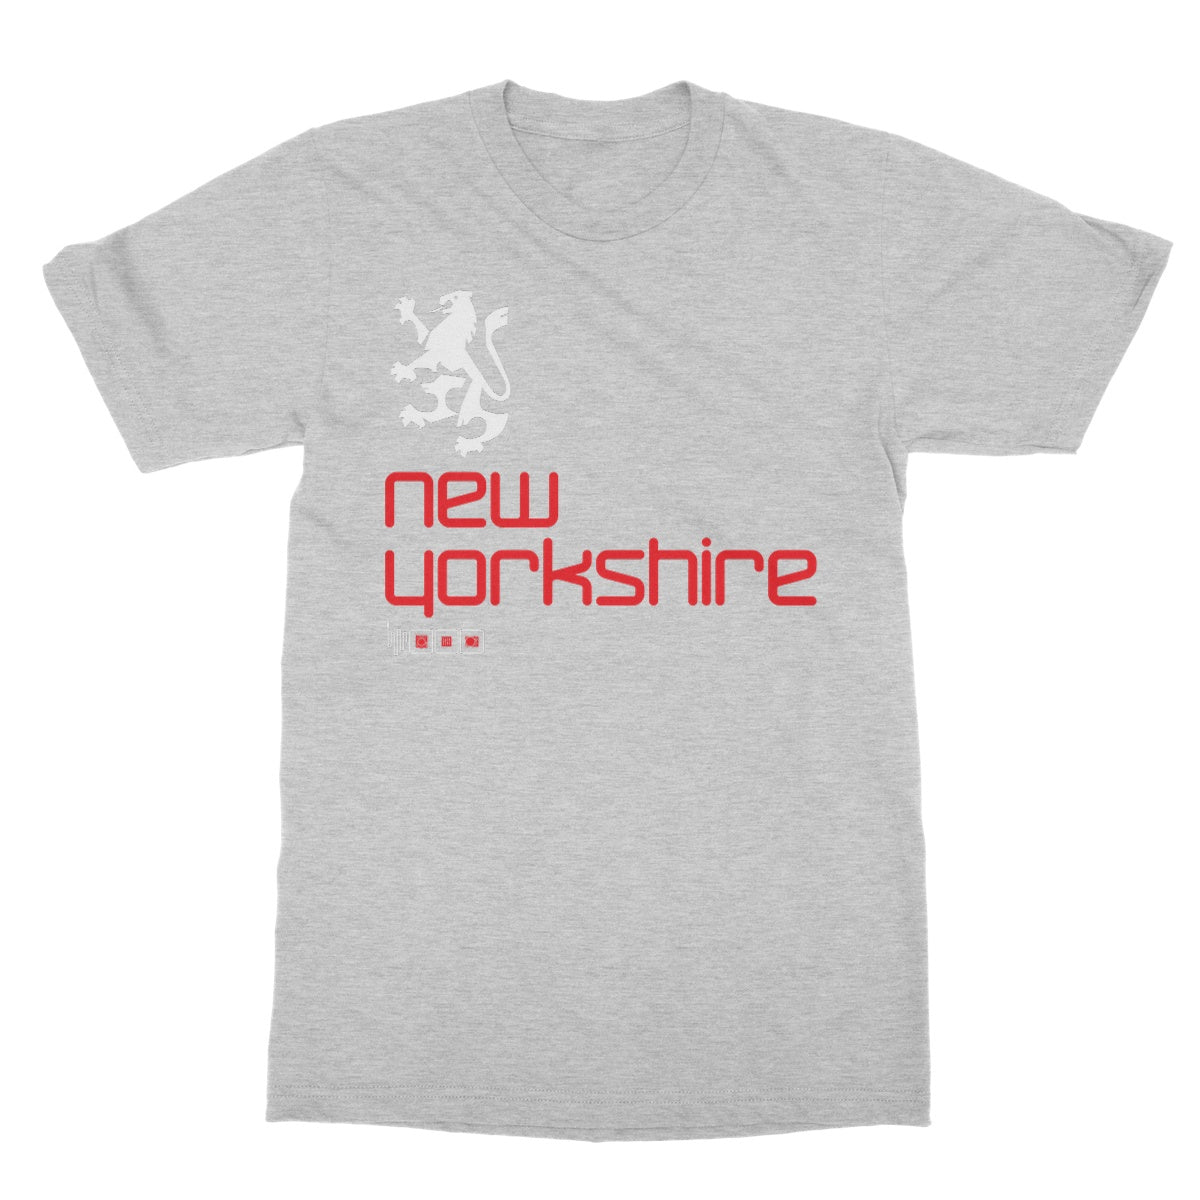 Made in New Yorkshire T-Shirt